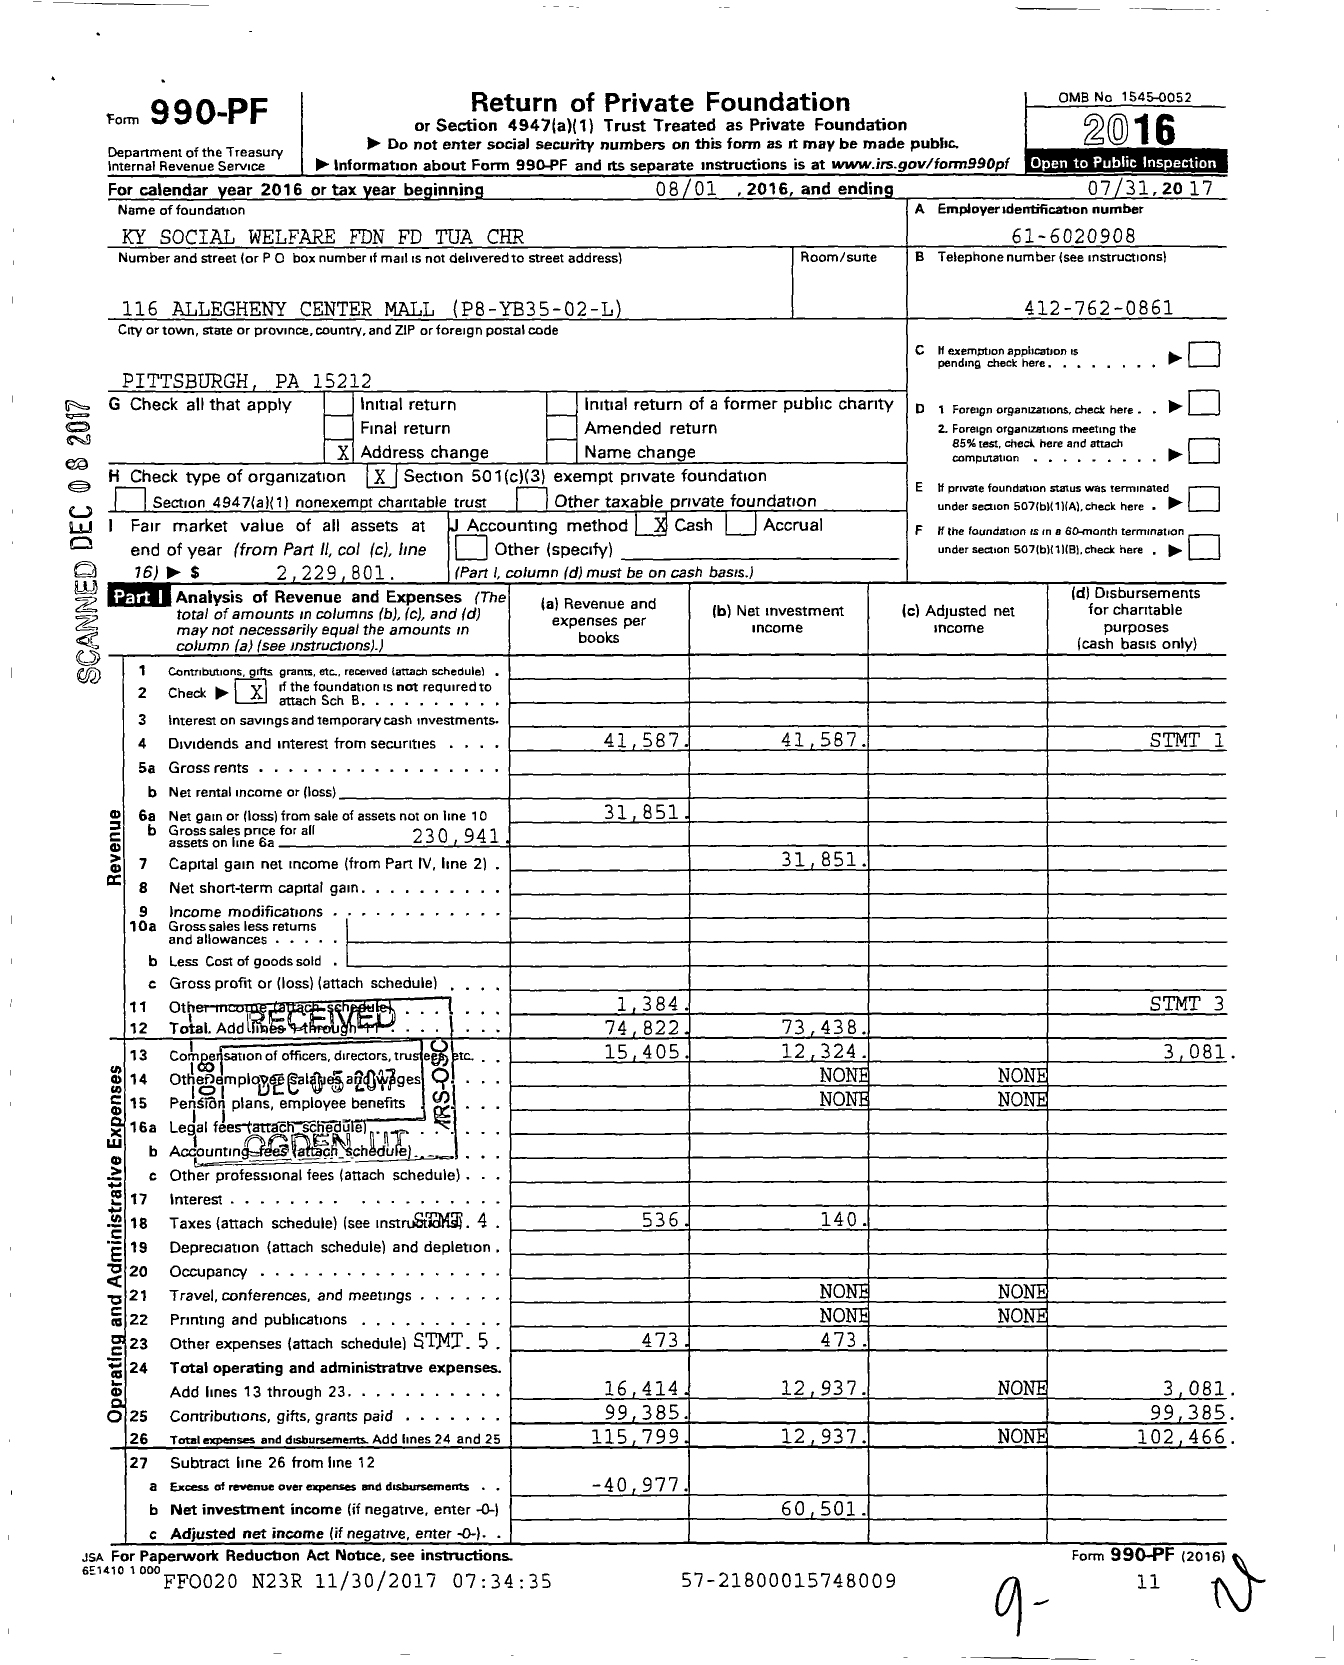 Image of first page of 2016 Form 990PF for Ky Social Welfare Foundation FD Tua CHR